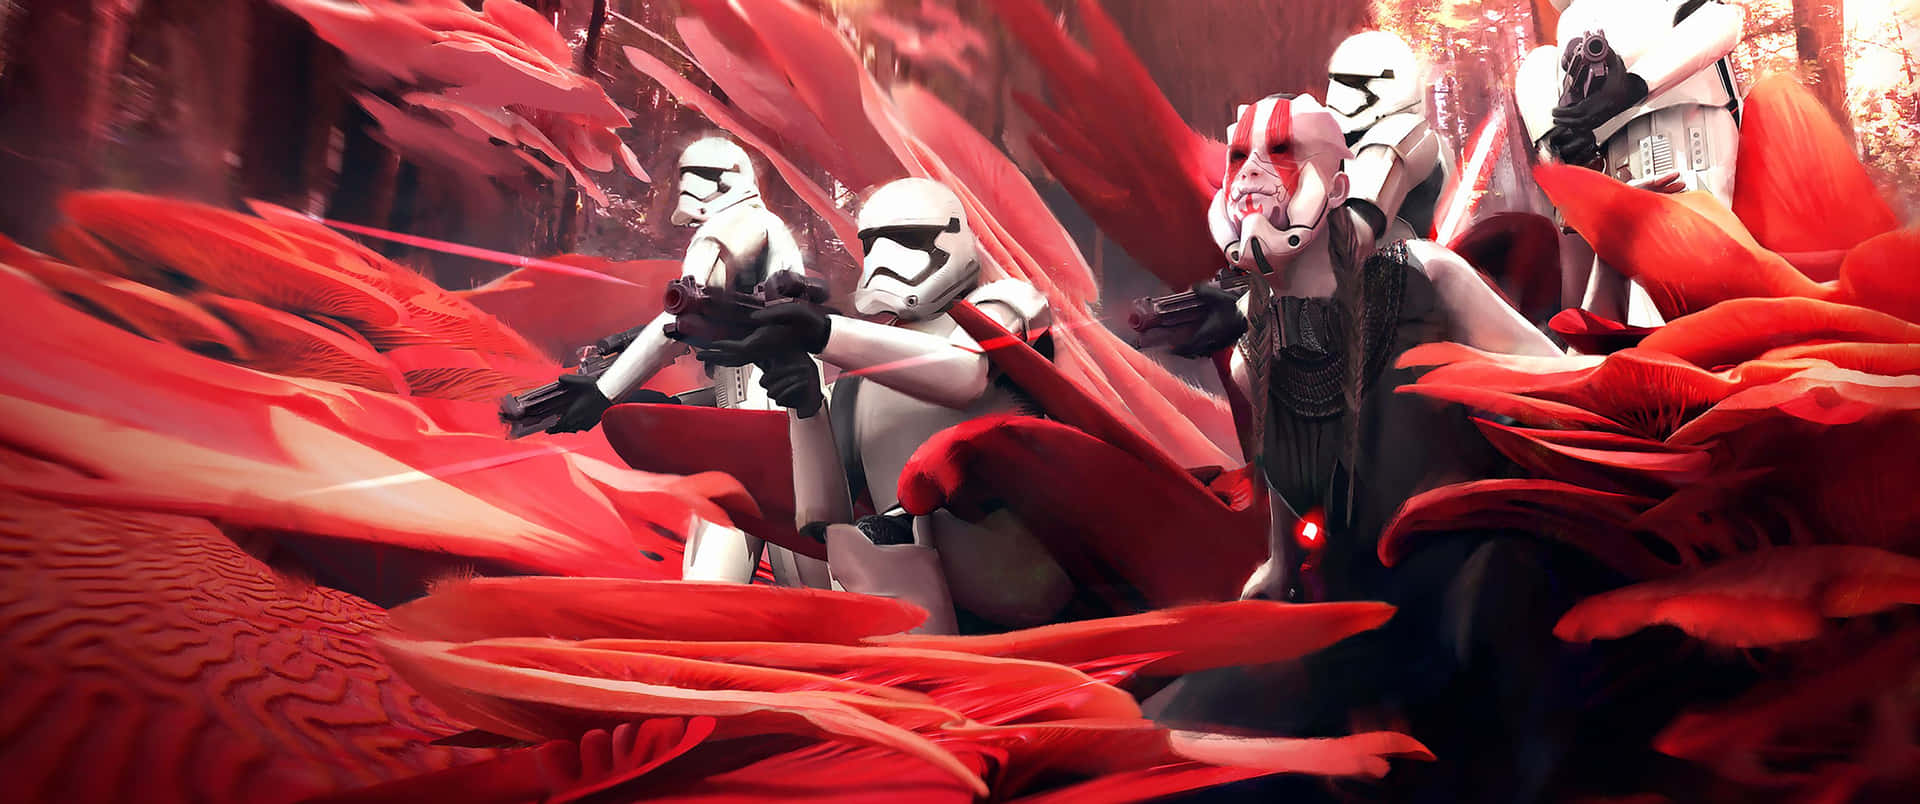 Lead Your Own Squadron into Battle with This Star Wars 3440x1440 Wallpaper Wallpaper